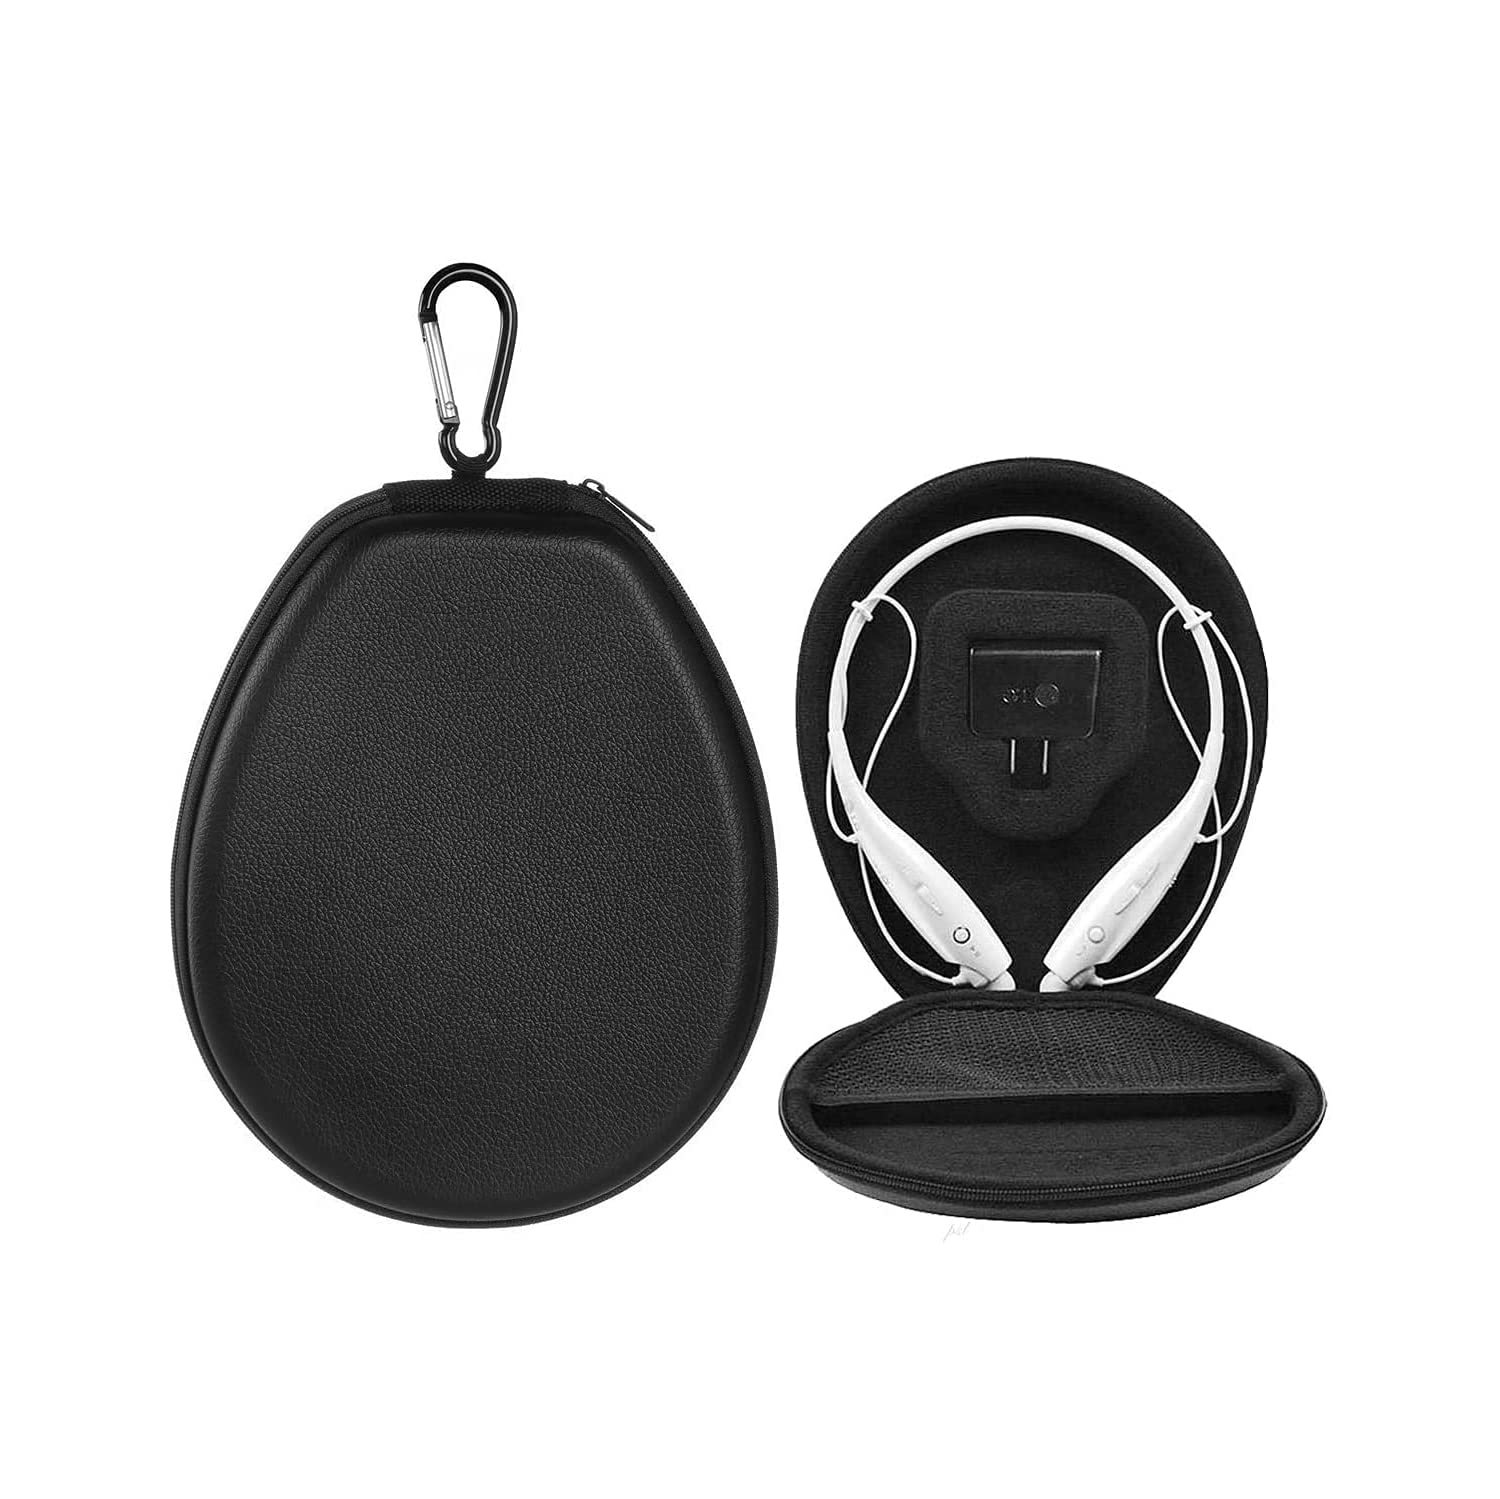 Carrying Case for LG Tone + HBS-900 HBS-760 HBS-800 Stereo Wireless Bluetooth Headset Headphones Hard